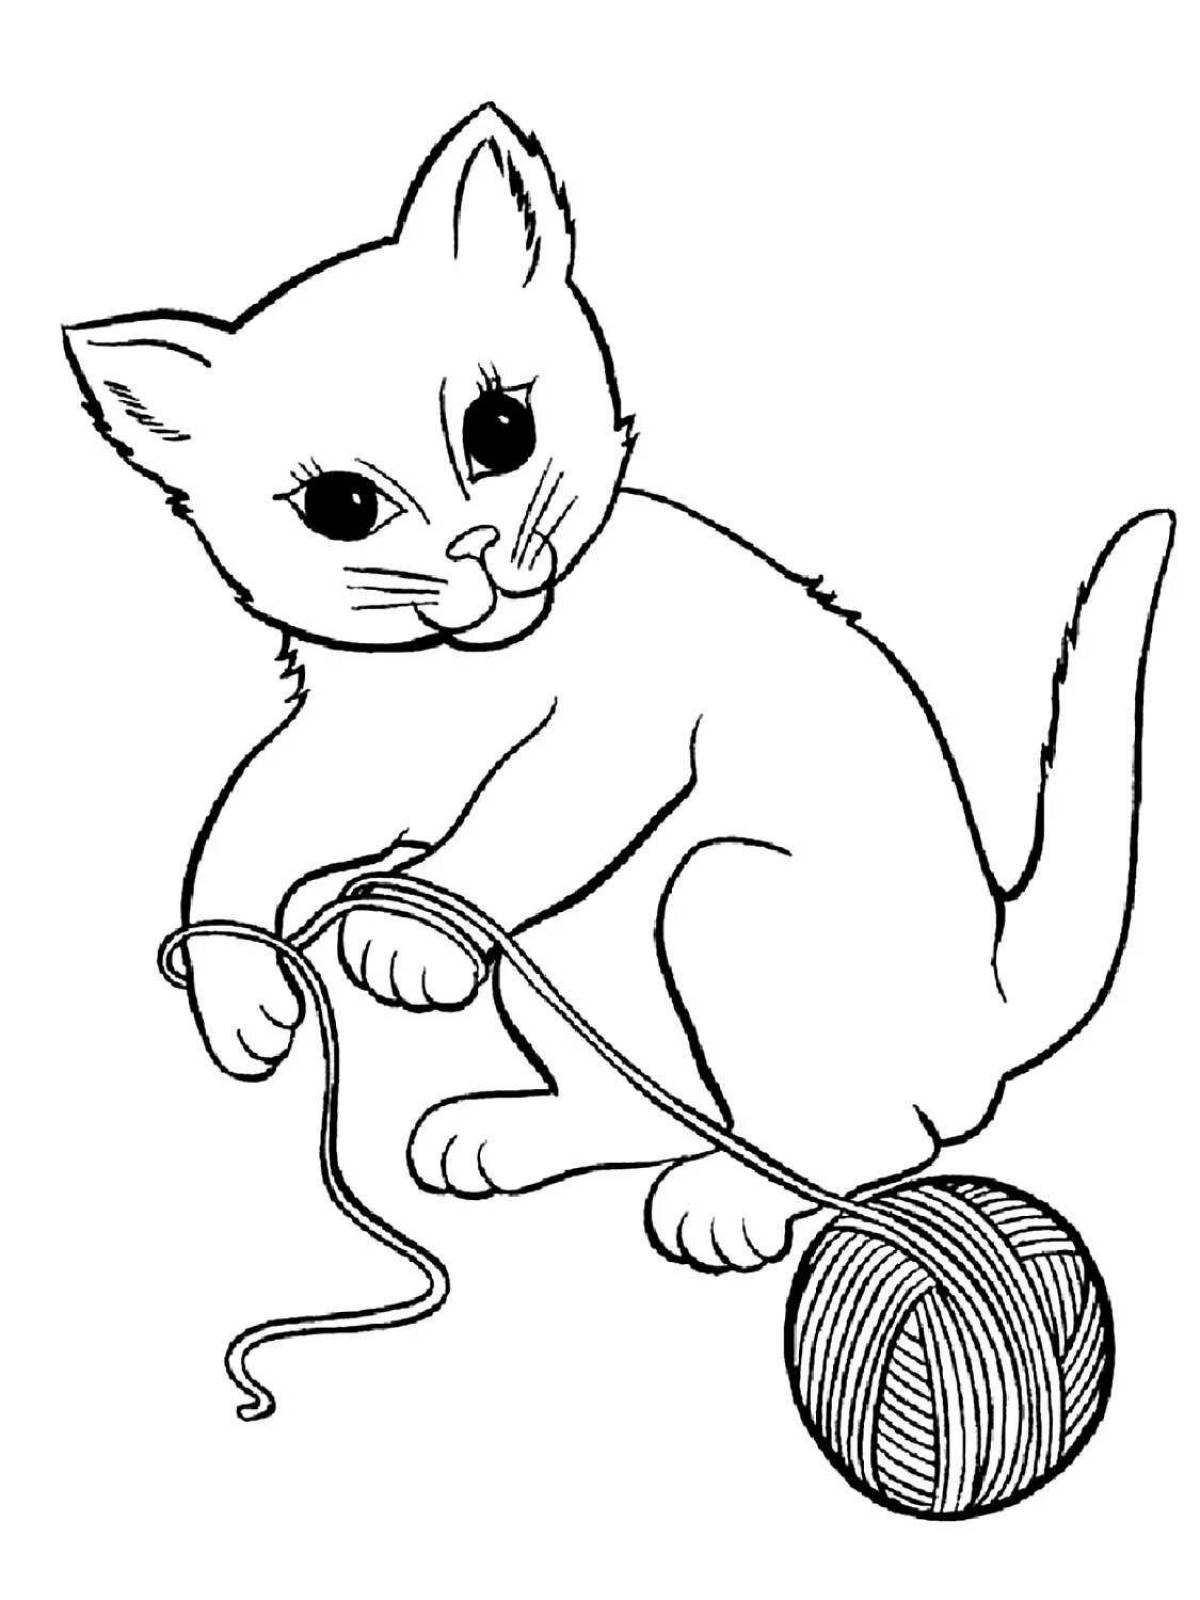 Coloring page affectionate kitten with a ball